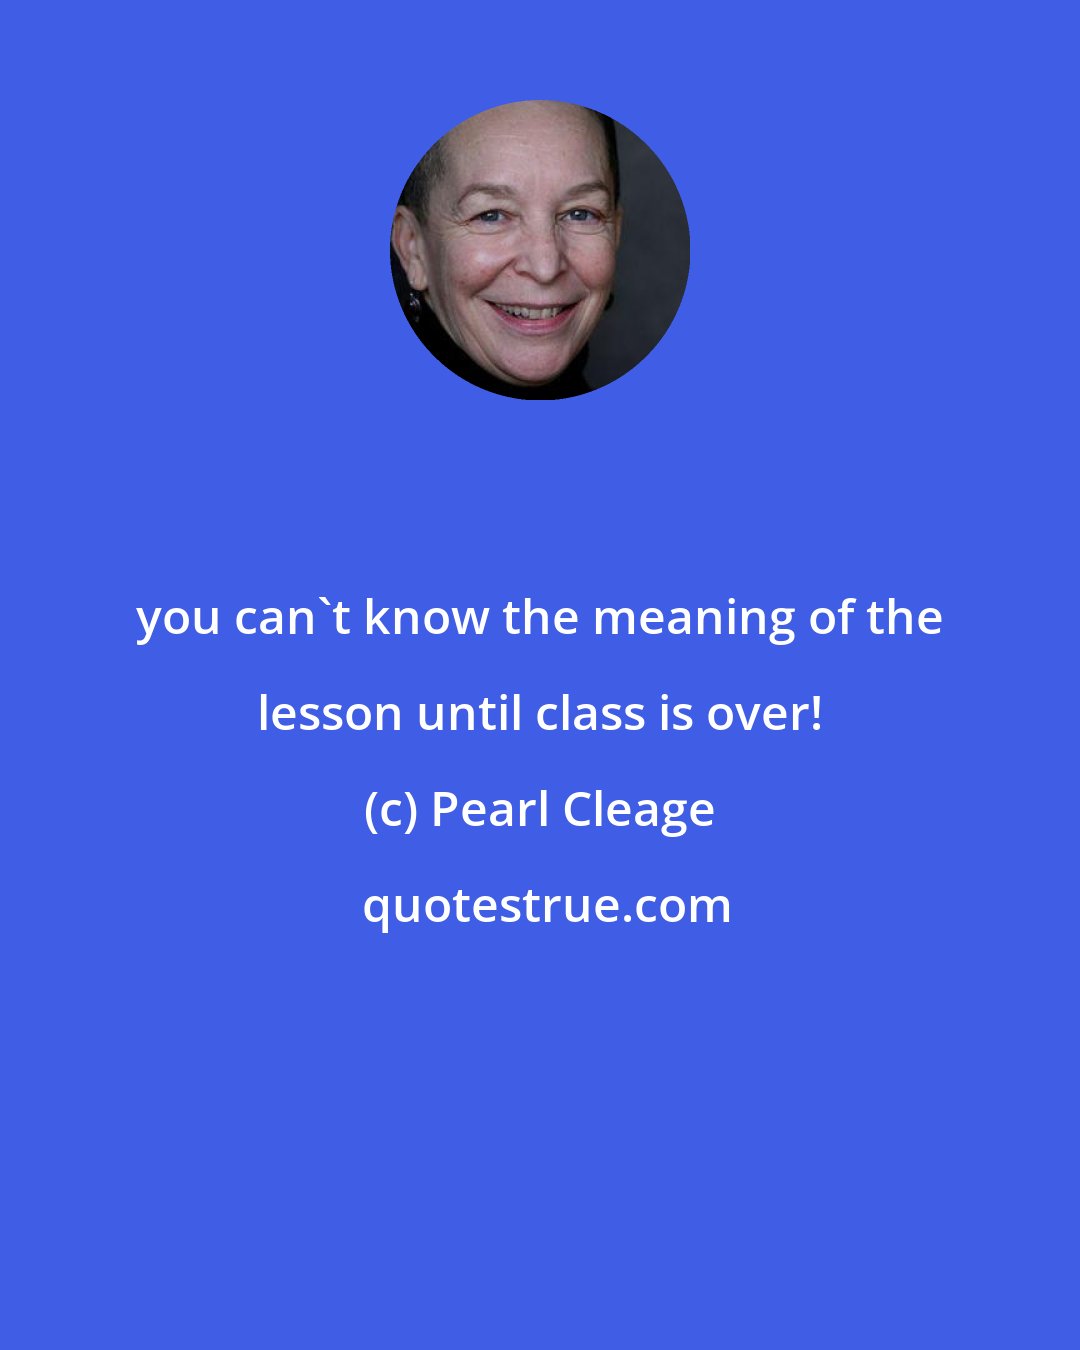 Pearl Cleage: you can't know the meaning of the lesson until class is over!